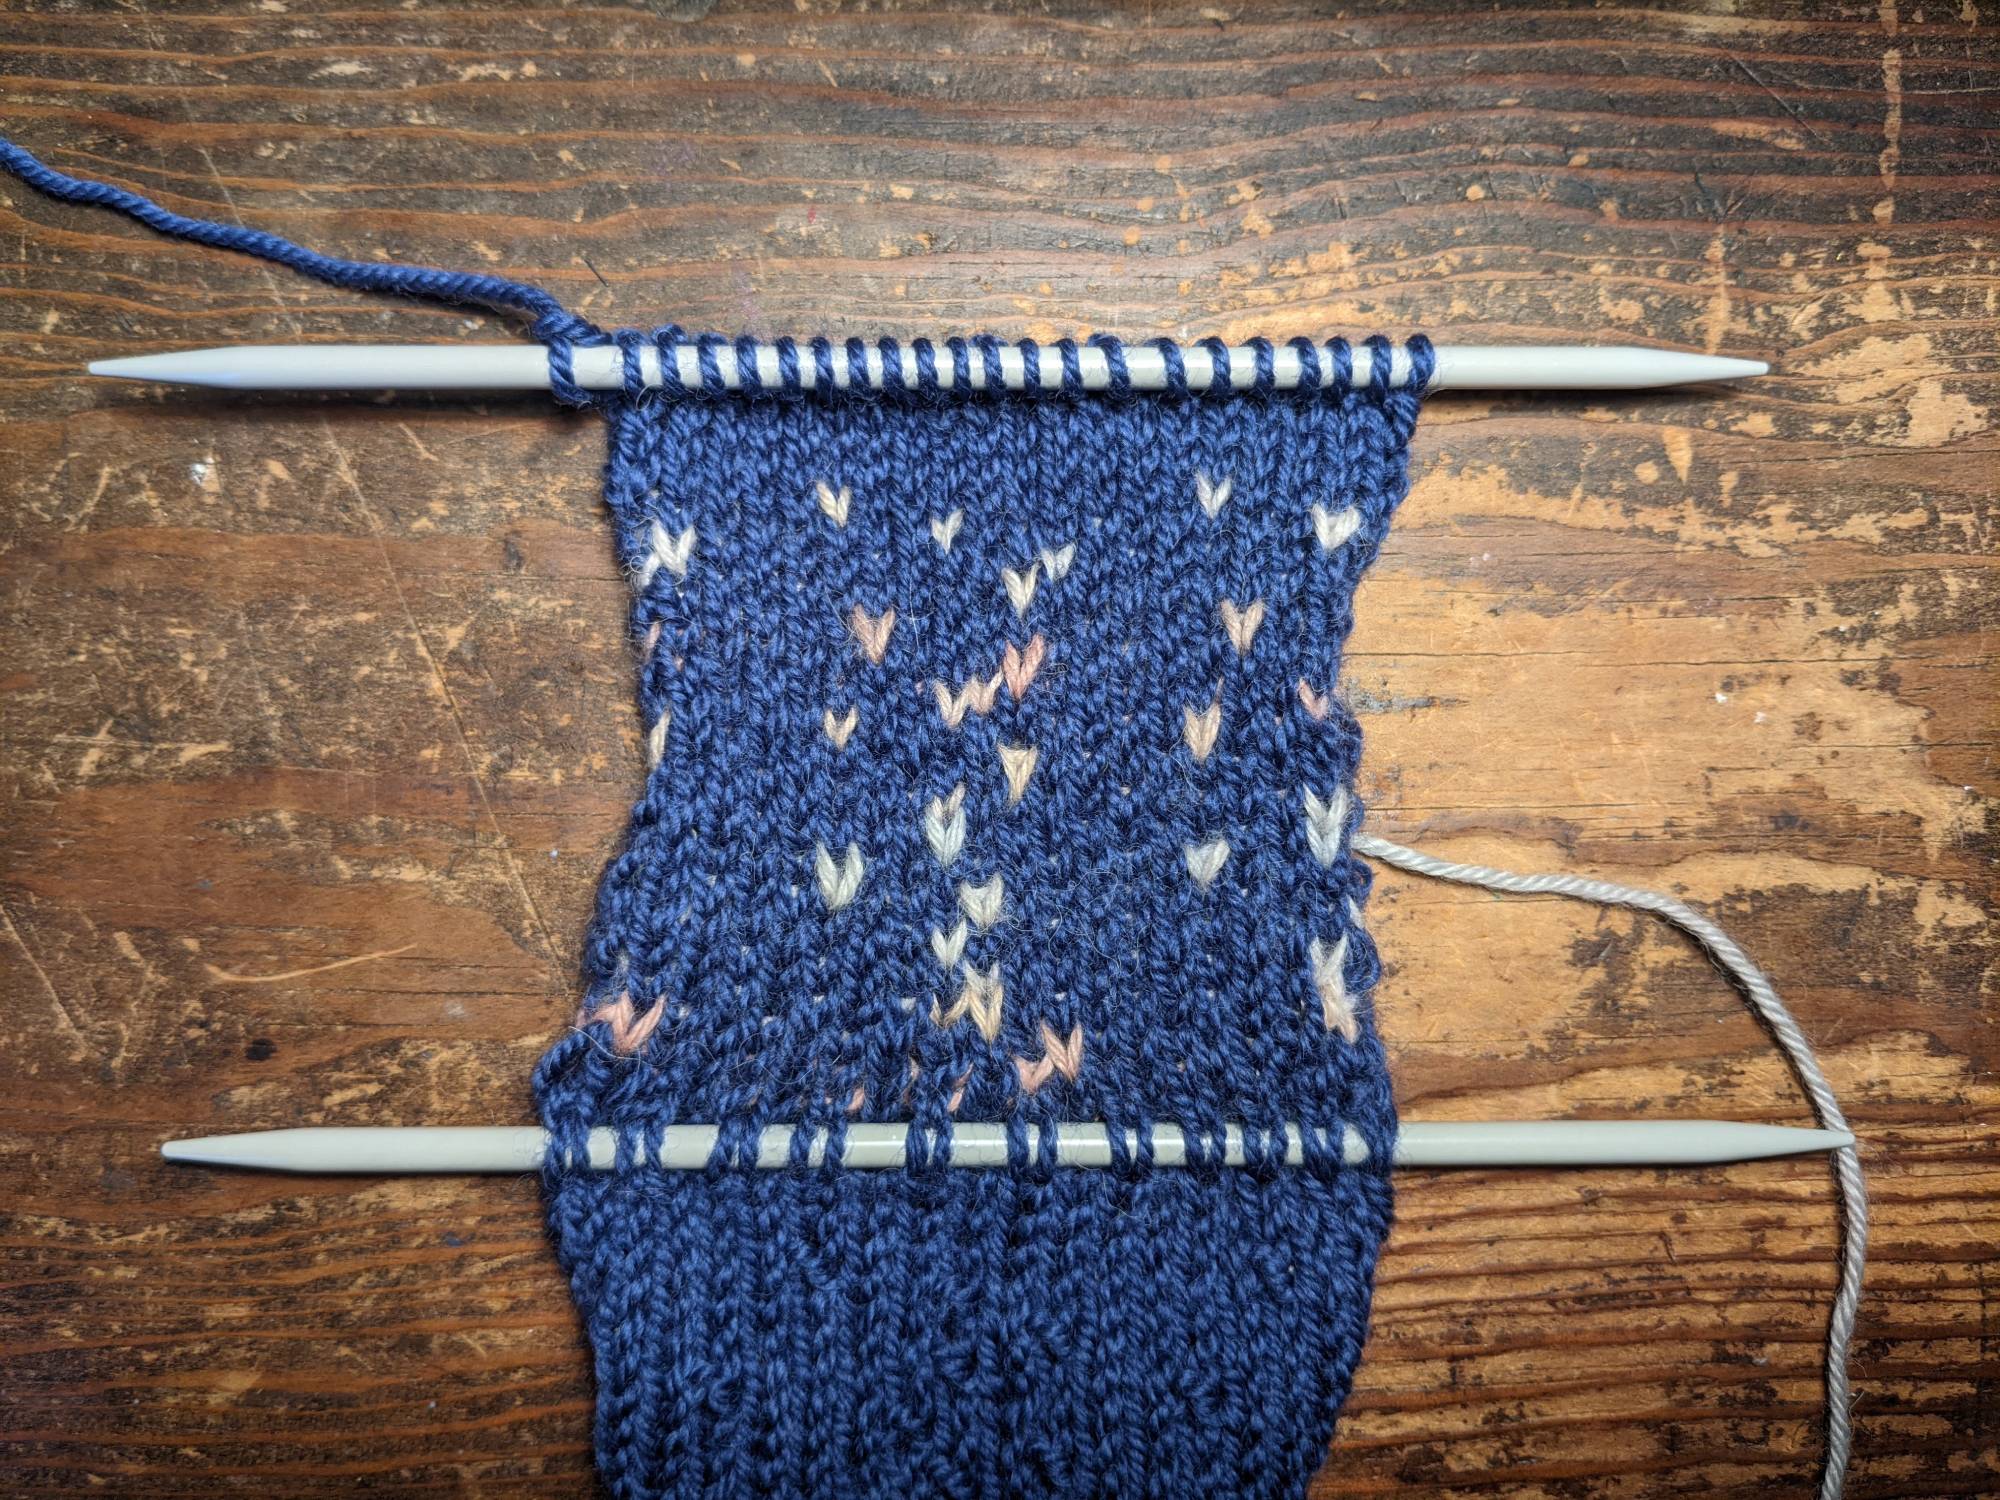 Knitting: Good for Your Health or Bad for Your Hands?